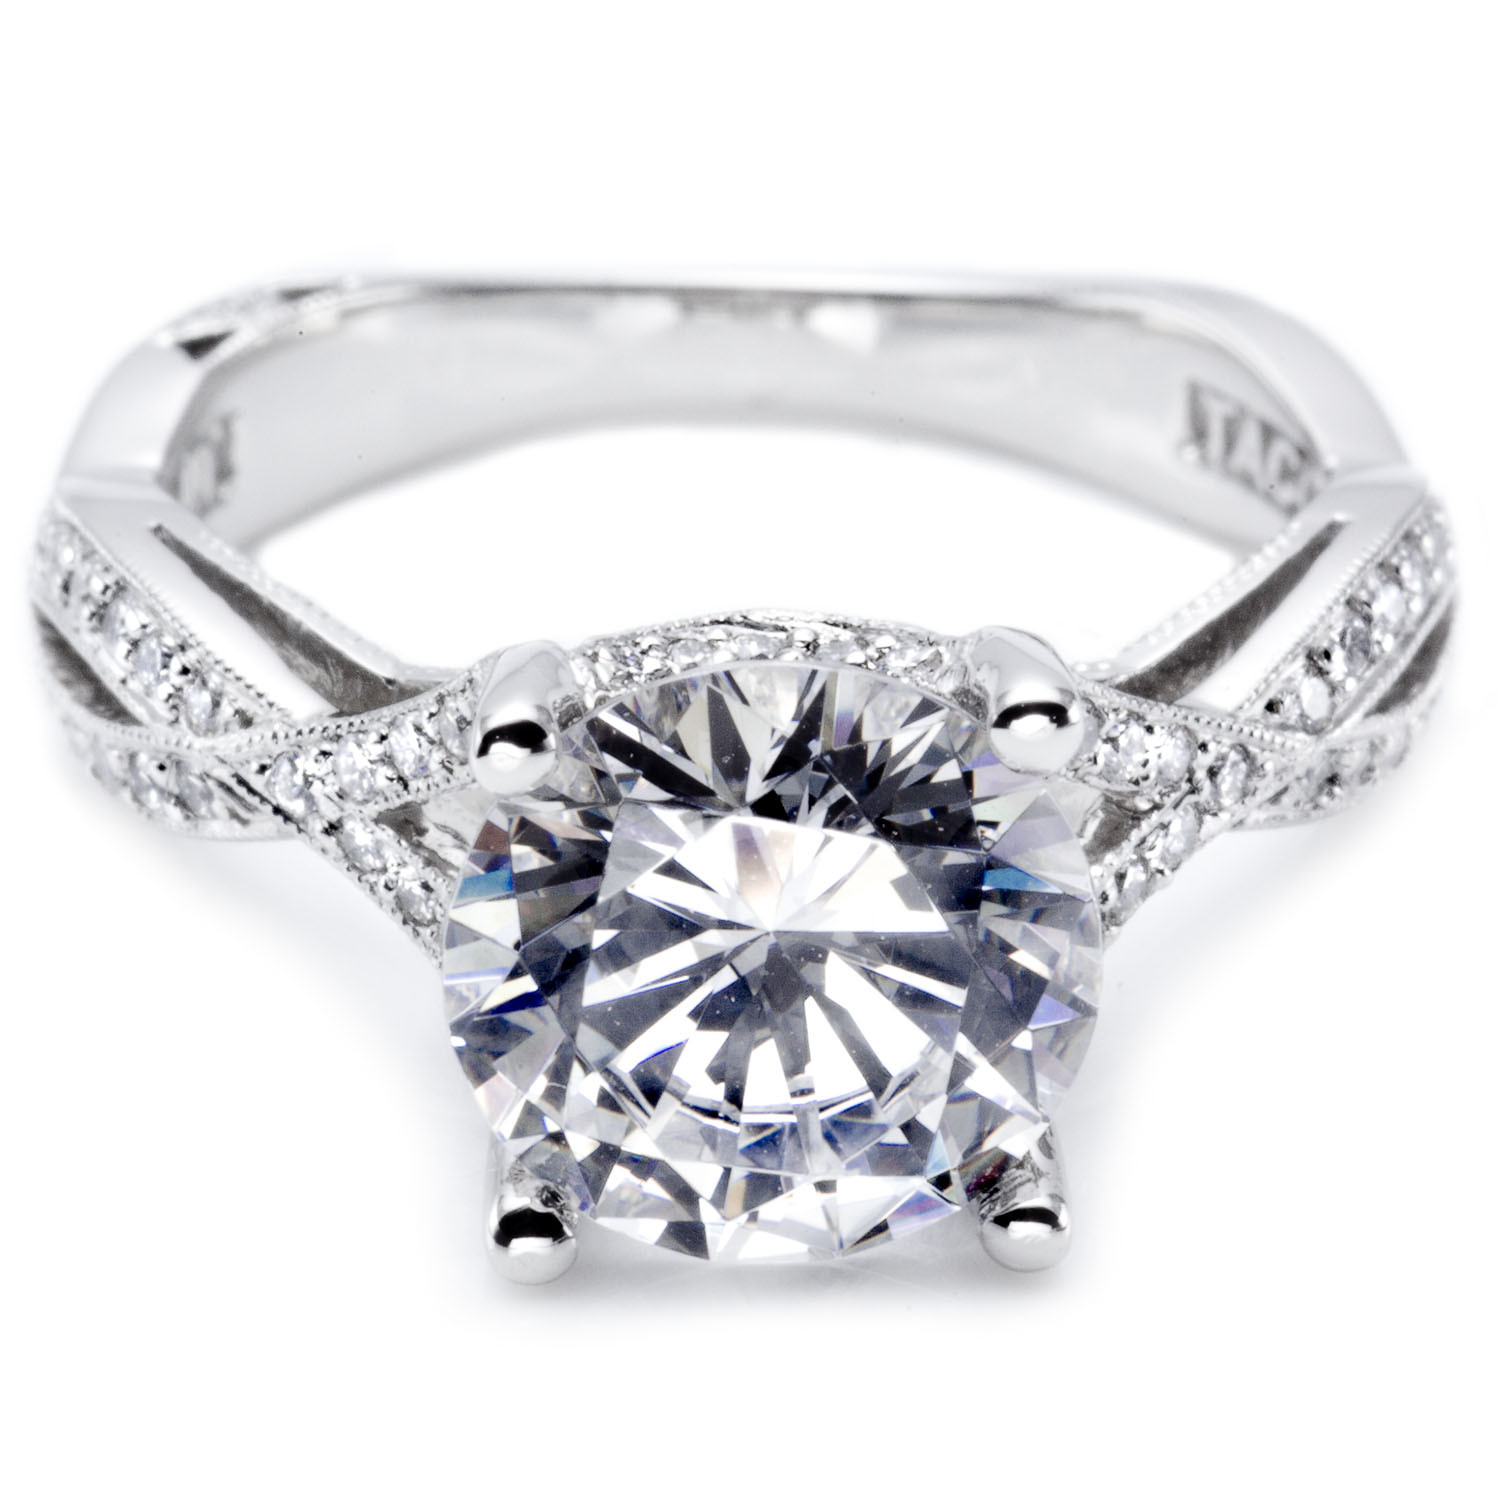 Pictures Of Diamond Engagement Rings
 Top 10 Engagement Diamond Rings